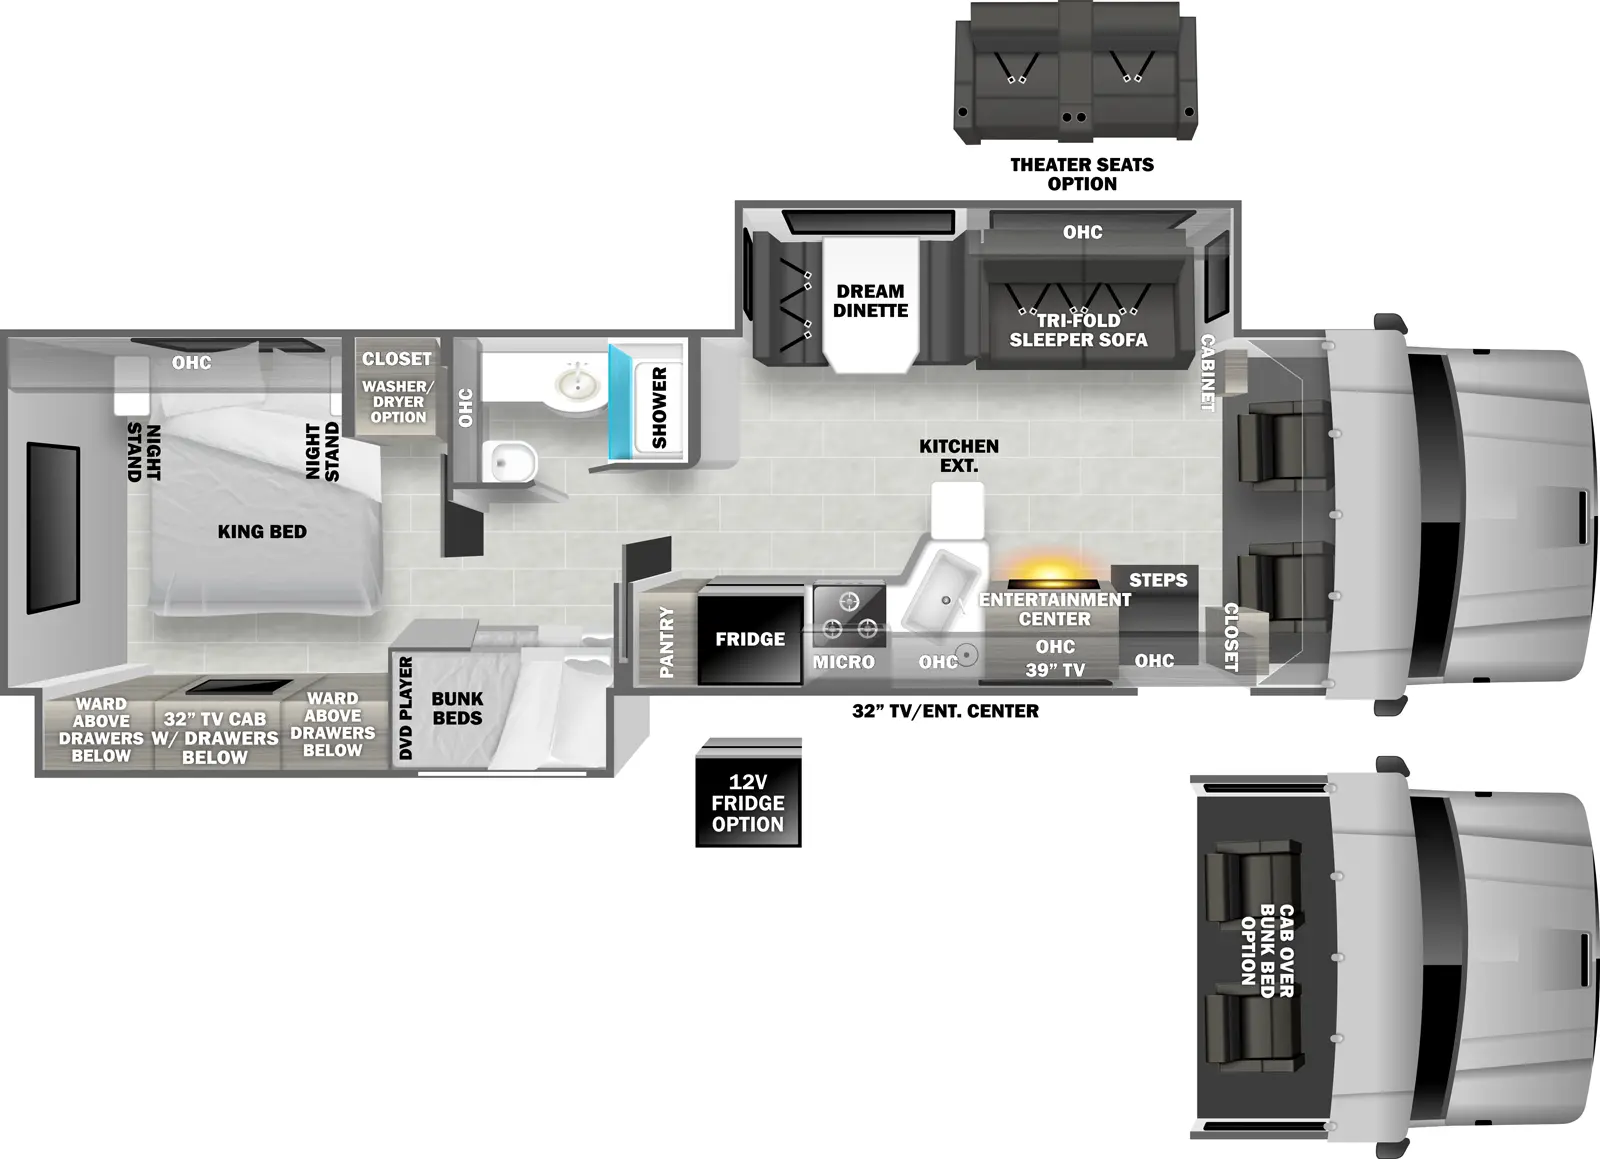 The 37BD has two slideouts and one entry. Exterior features a TV/entertainment center. Interior layout front to back: cockpit (optional cab over bunk bed); off-door side cabinet, and slideout with tri-fold sleeper sofa (optional theater seating) with overhead cabinets, and dream dinette; door side closet, entry, entertainment center with TV, overhead cabinet, kitchen counter with extension, sink, microwave, cooktop, refrigerator (optional 12-volt refrigerator), and pantry; off-door side full bathroom with overhead cabinet; door side slideout with bunk beds with DVD player, and bedroom wardrobe with TV and drawers below; rear bedroom with off-door side closet with washer/dryer option, and side-facing king bed with overhead cabinet and night stands on each side.